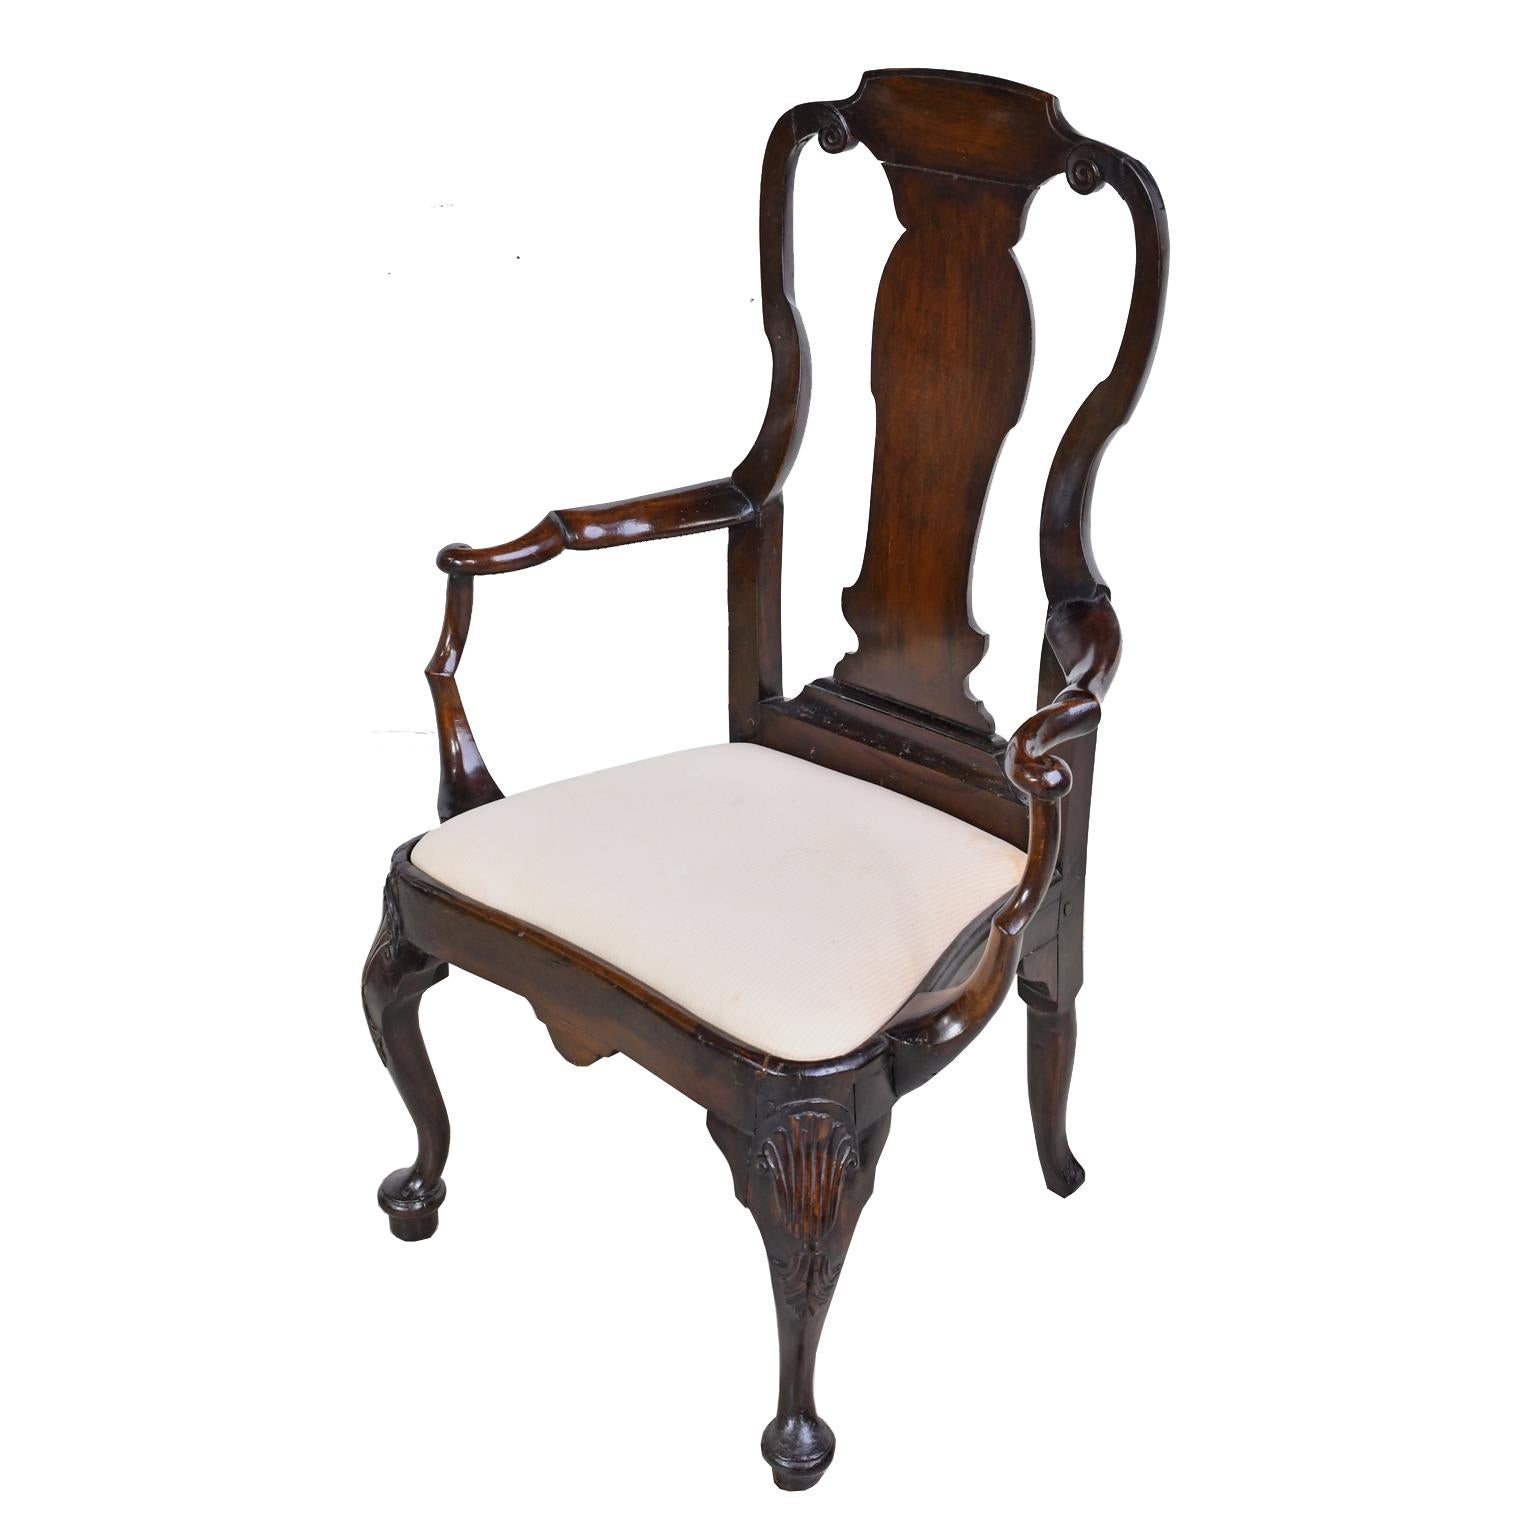 A very beautiful 18th century Dutch chair from the time of Willem IV (b. 1711 - d. 1751) who ruled as Prince of Orange and Nassau and general hereditary stadtholder of the United Netherlands. Chair frame is in mahogany with spoon-back, with carved